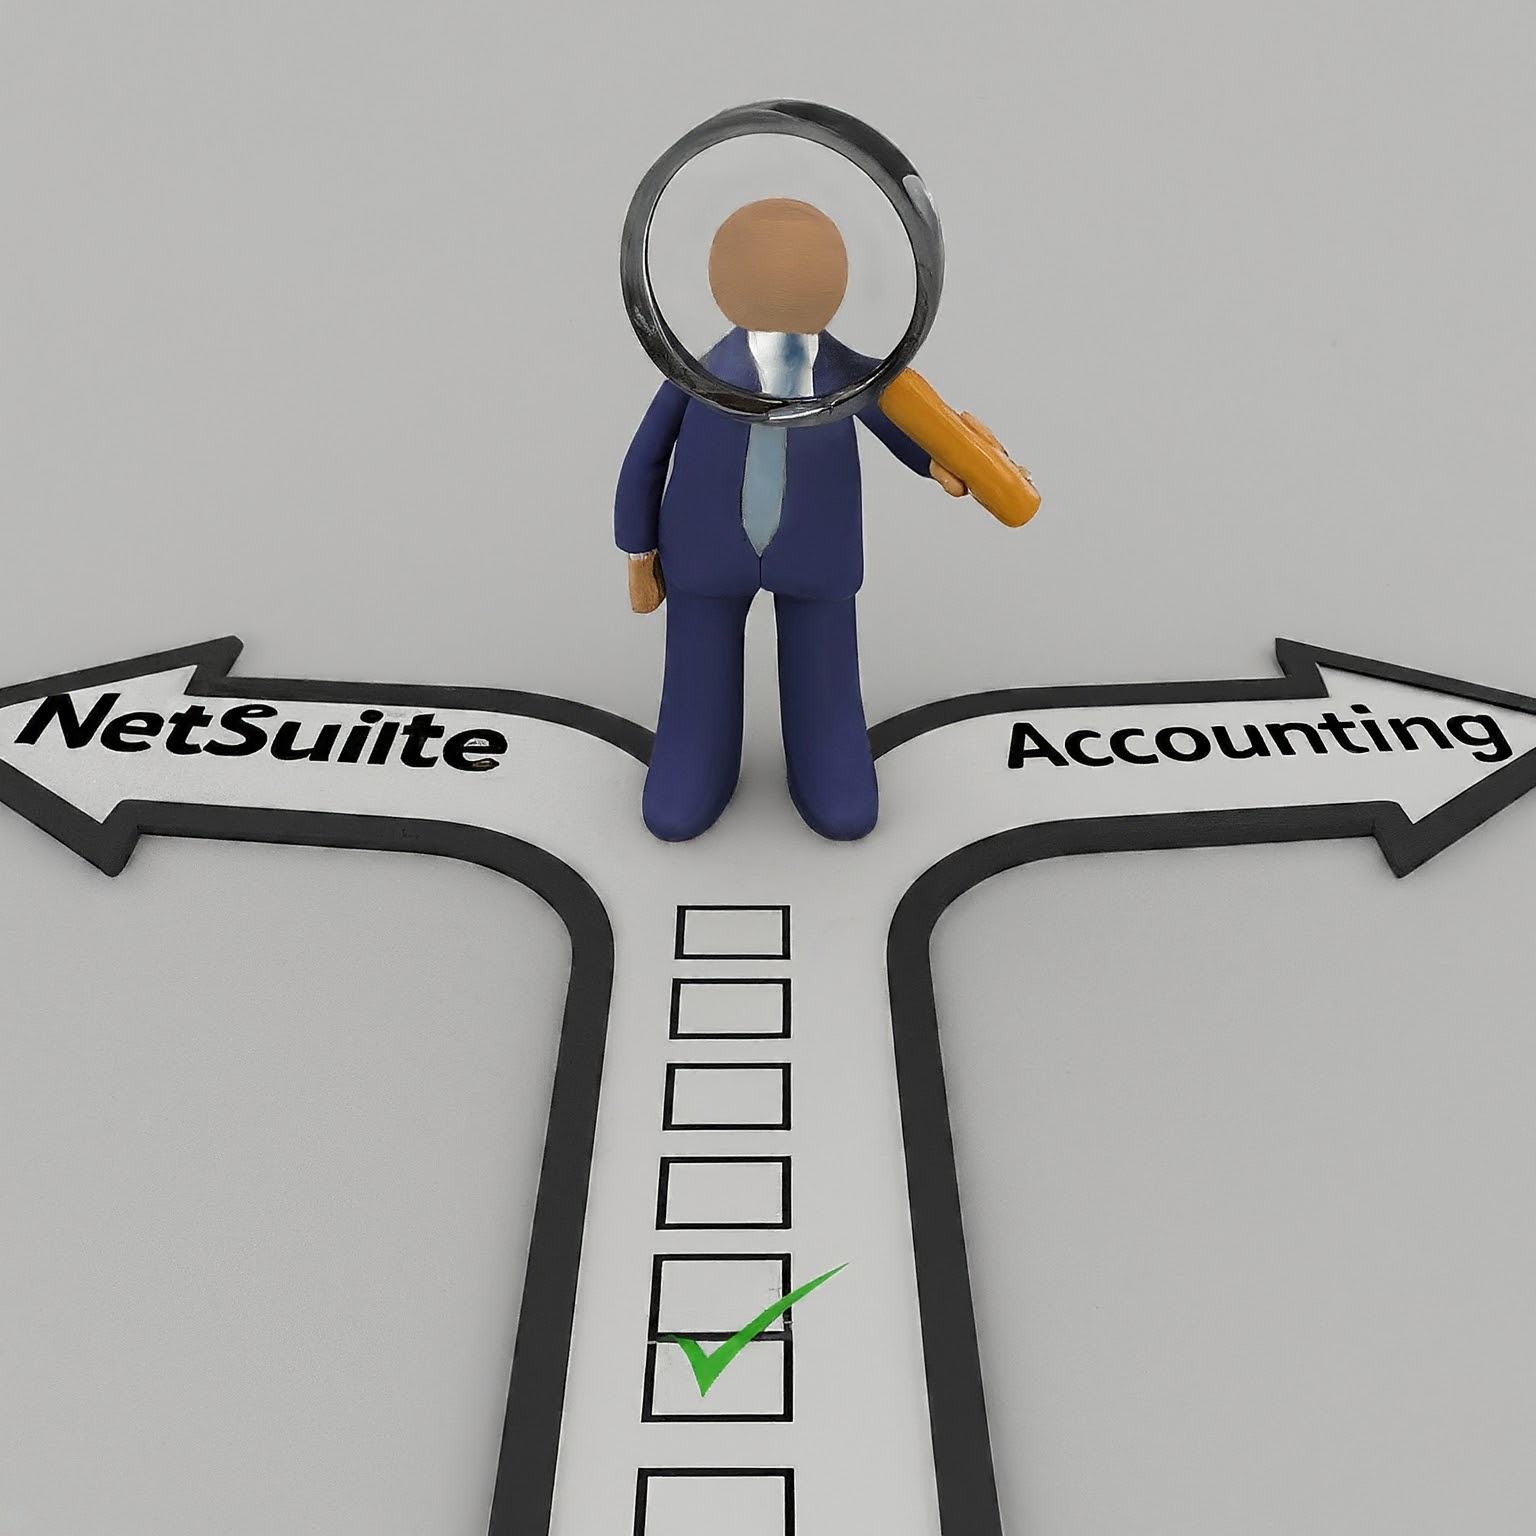 Is NetSuite Accounting Right for Your Business? Here's How to Decide